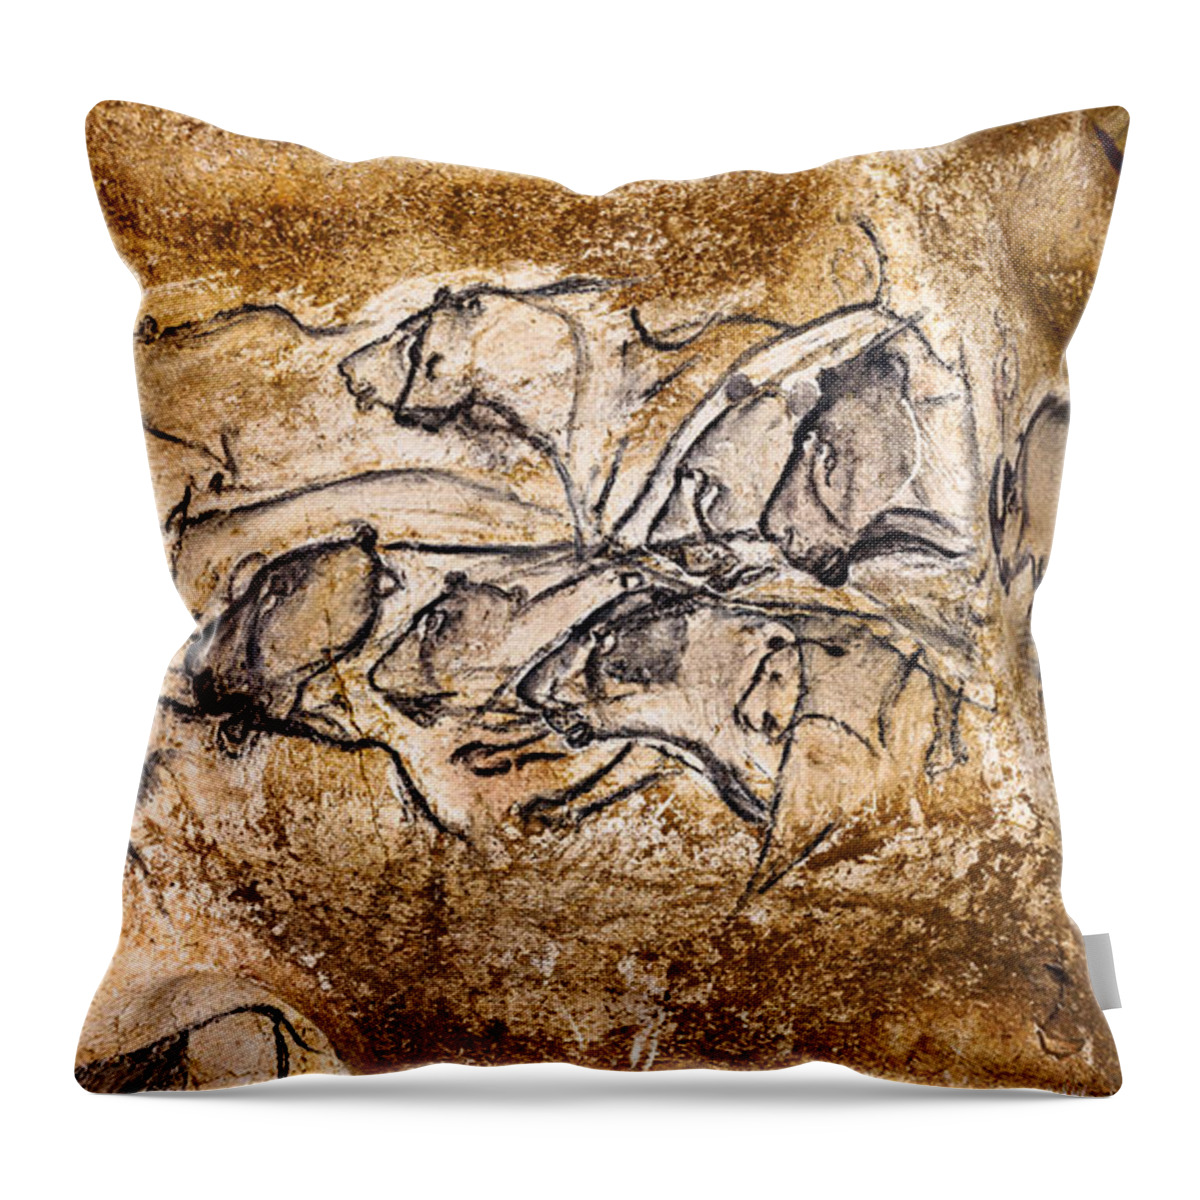 Chauvet Throw Pillow featuring the photograph Chauvet Lions and Bison by Weston Westmoreland